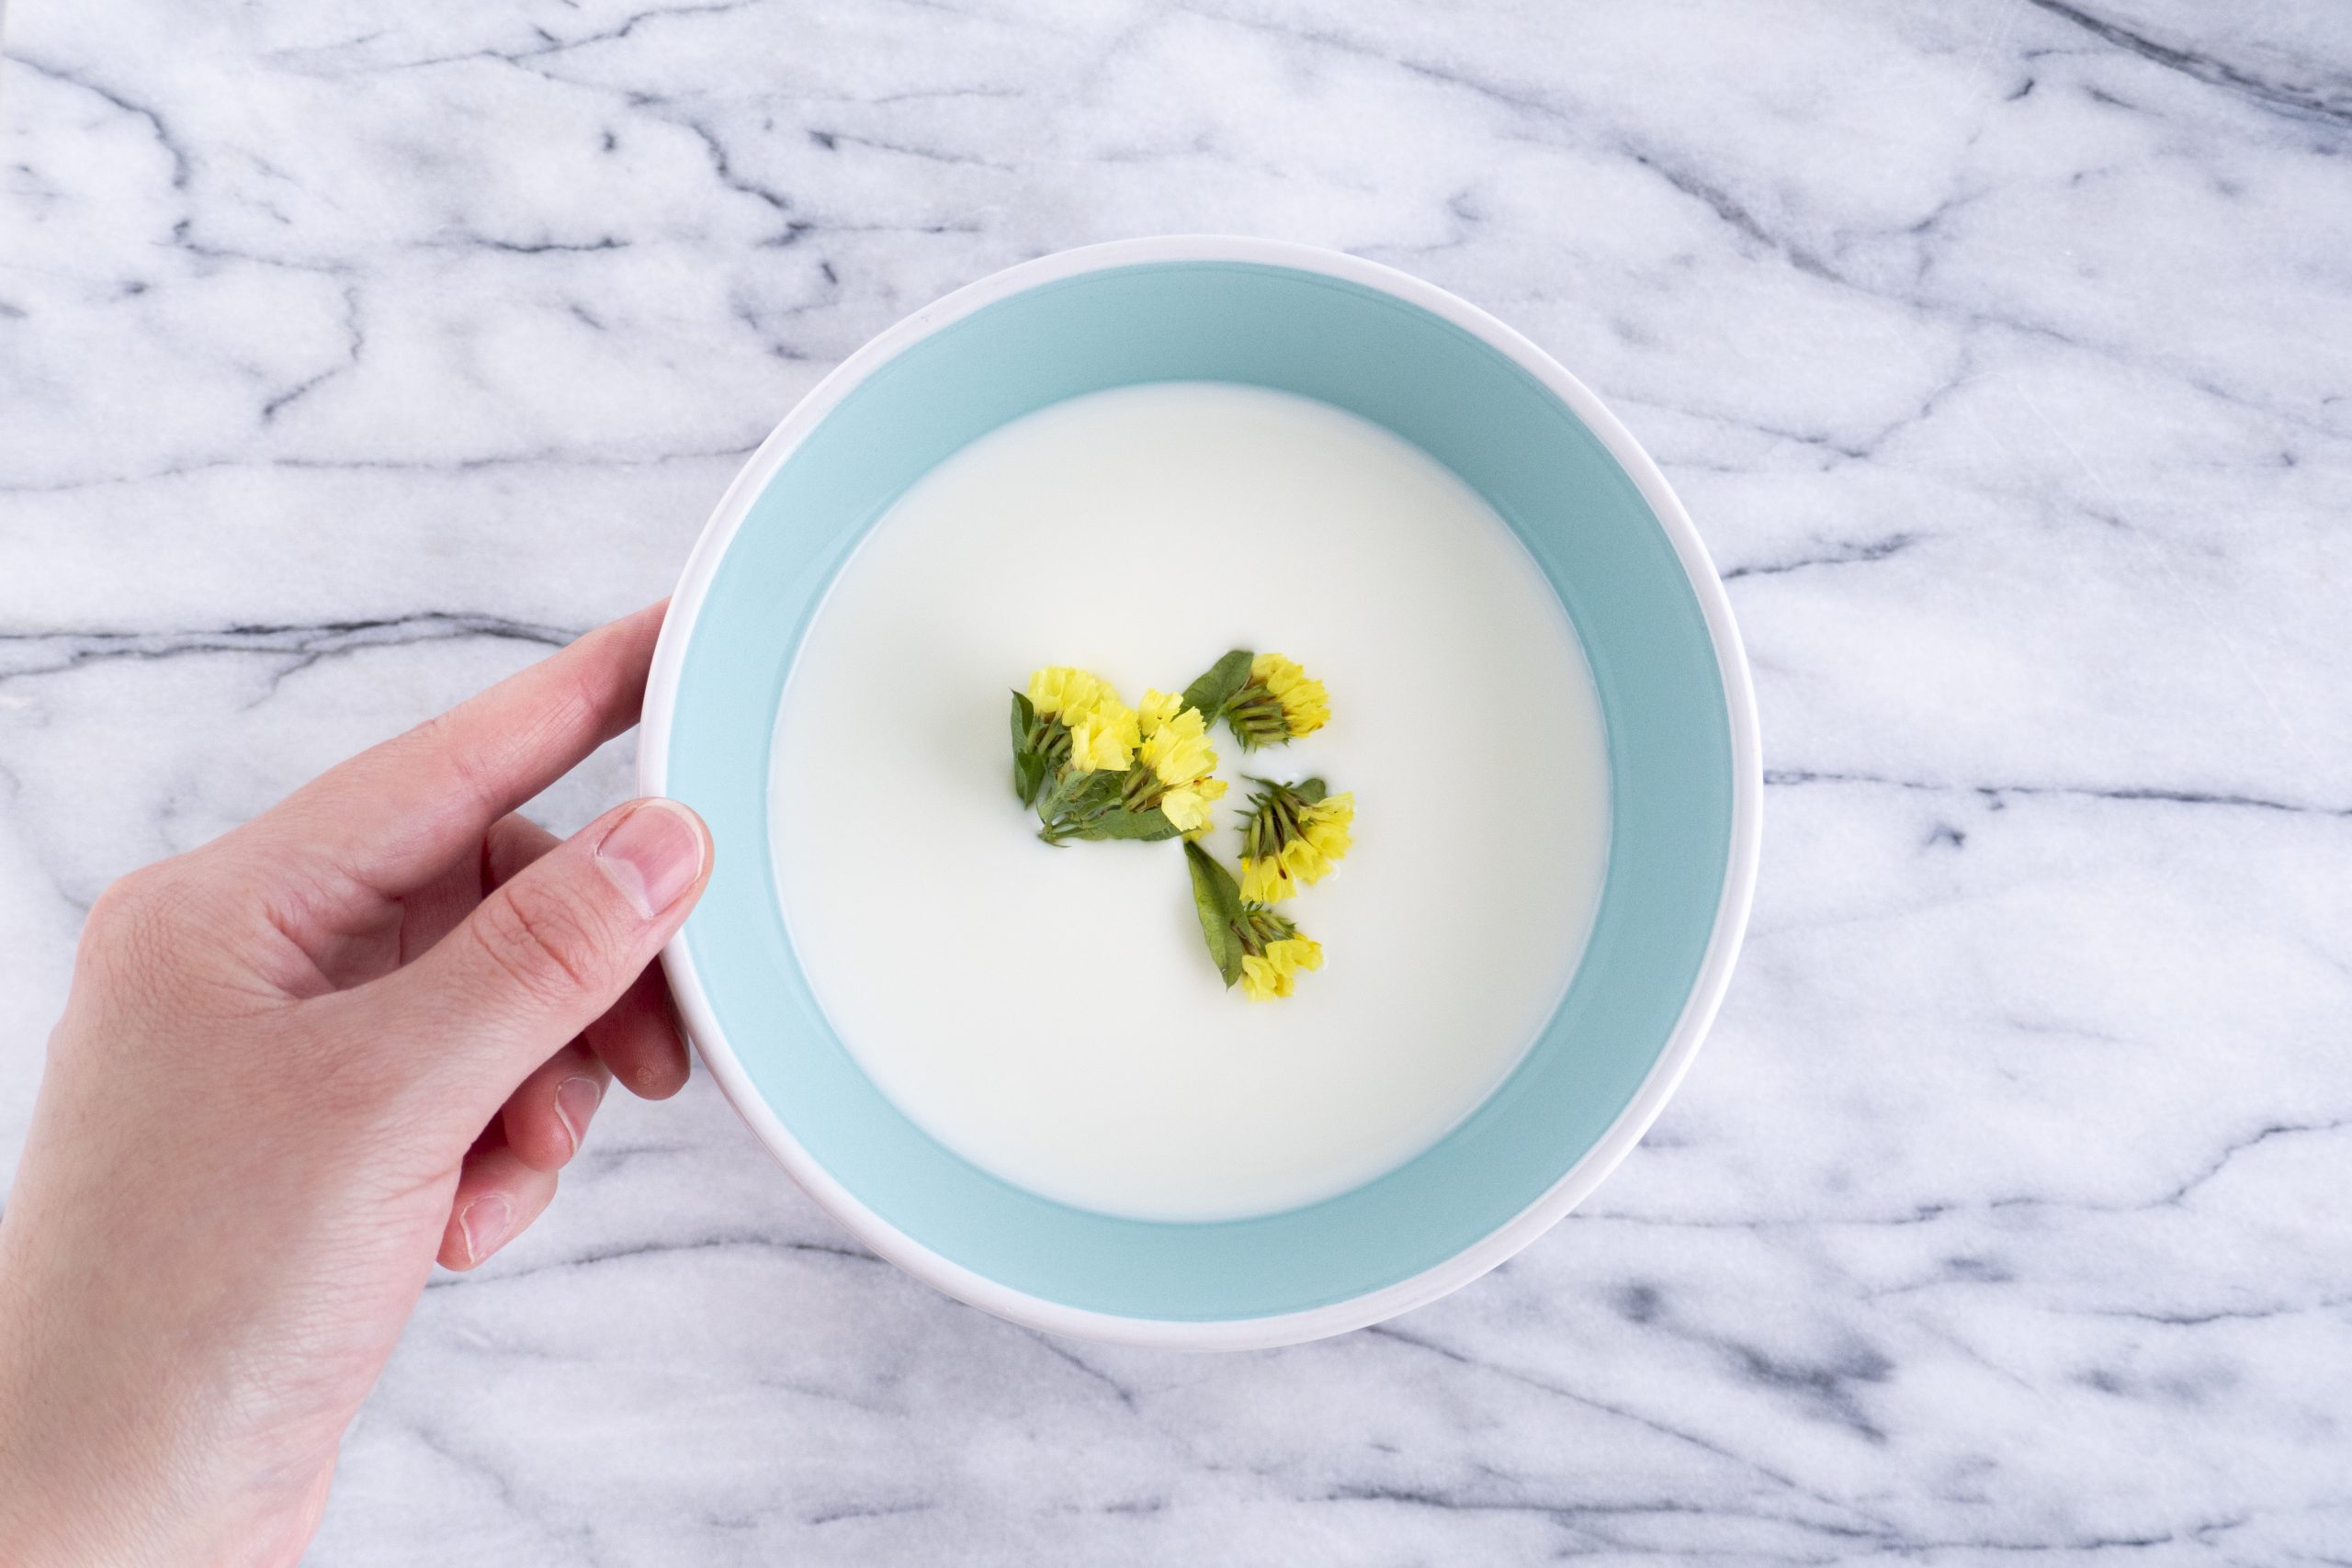 a hand touching teal colored bowl with yellow flowers floating in milk on marble surface